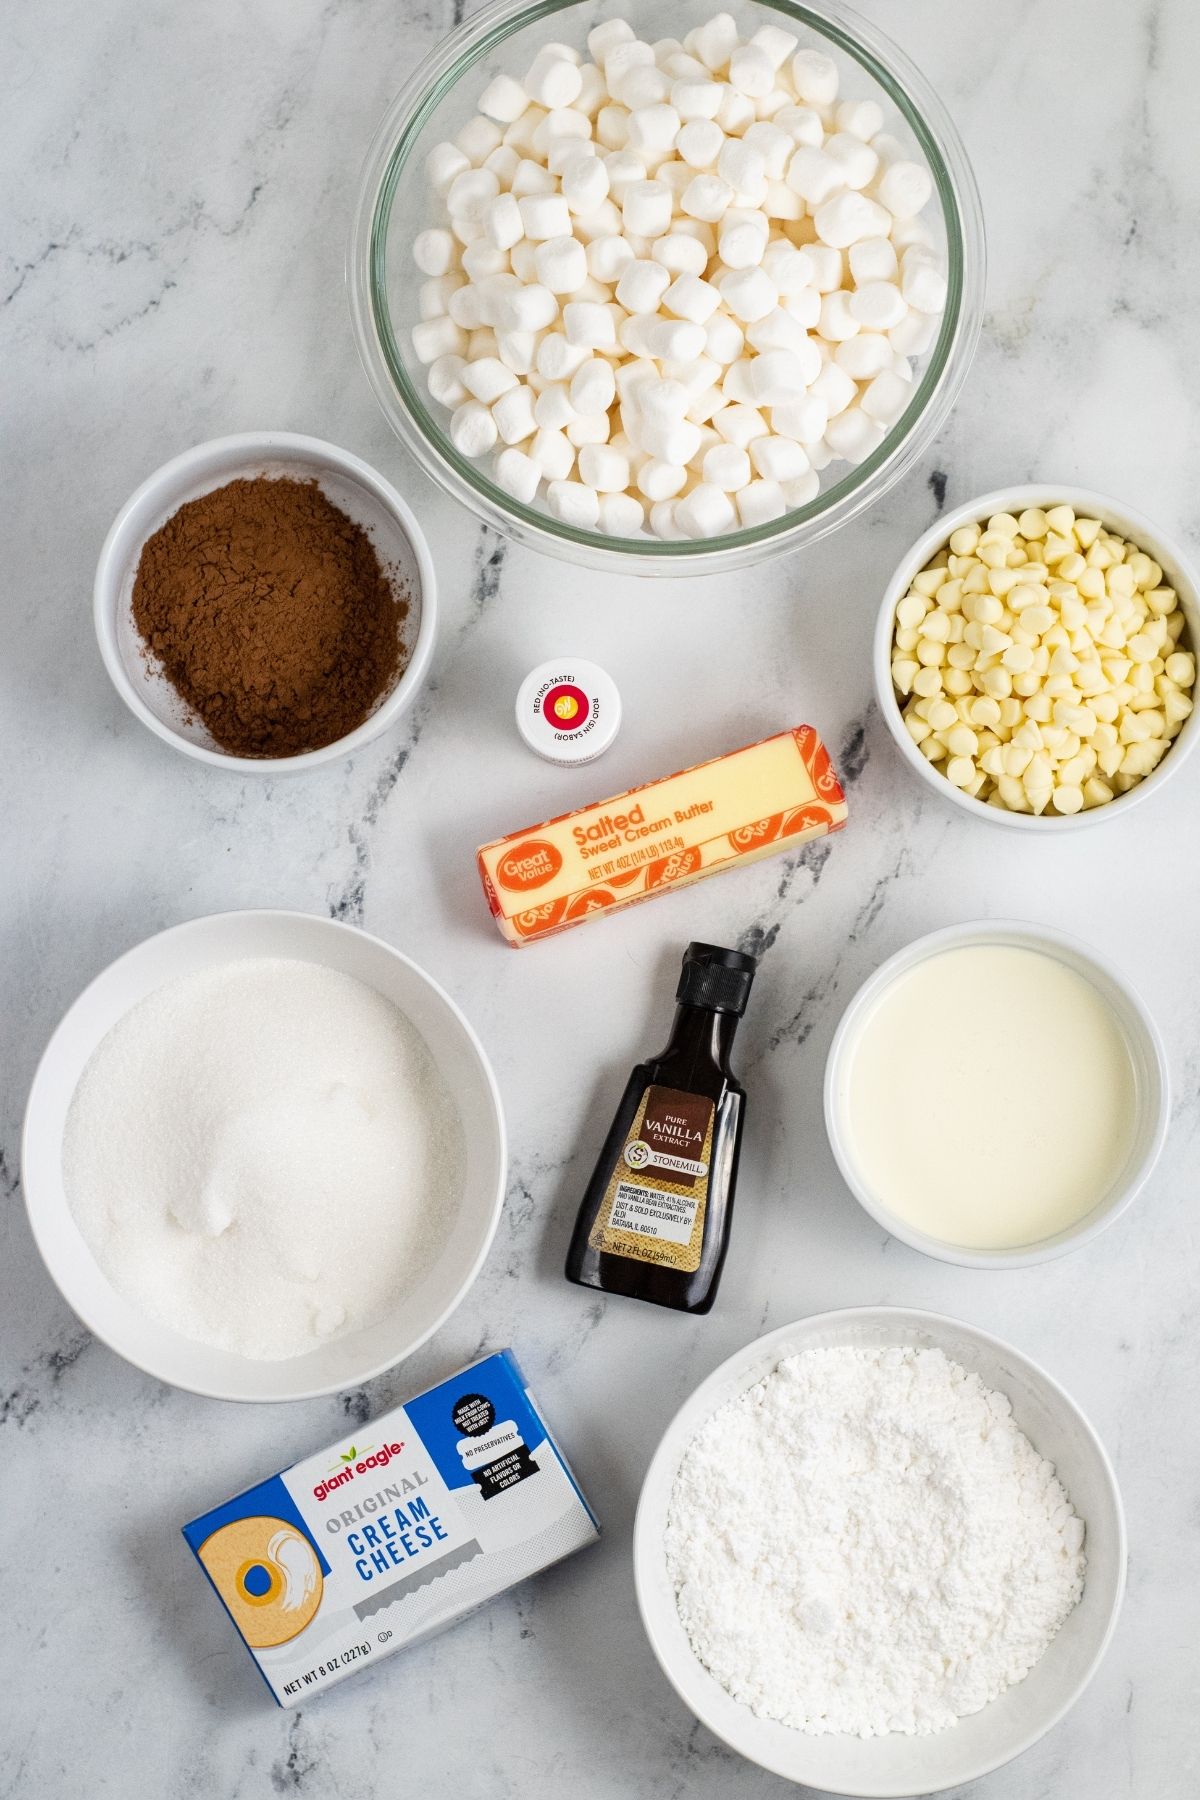 ingredients in bowls on white counter: mini marshmallows, white chocolate chips, 1 stick butter, red food coloring, cocoa powder, vanilla, cream cheese, sugar, powdered sugar